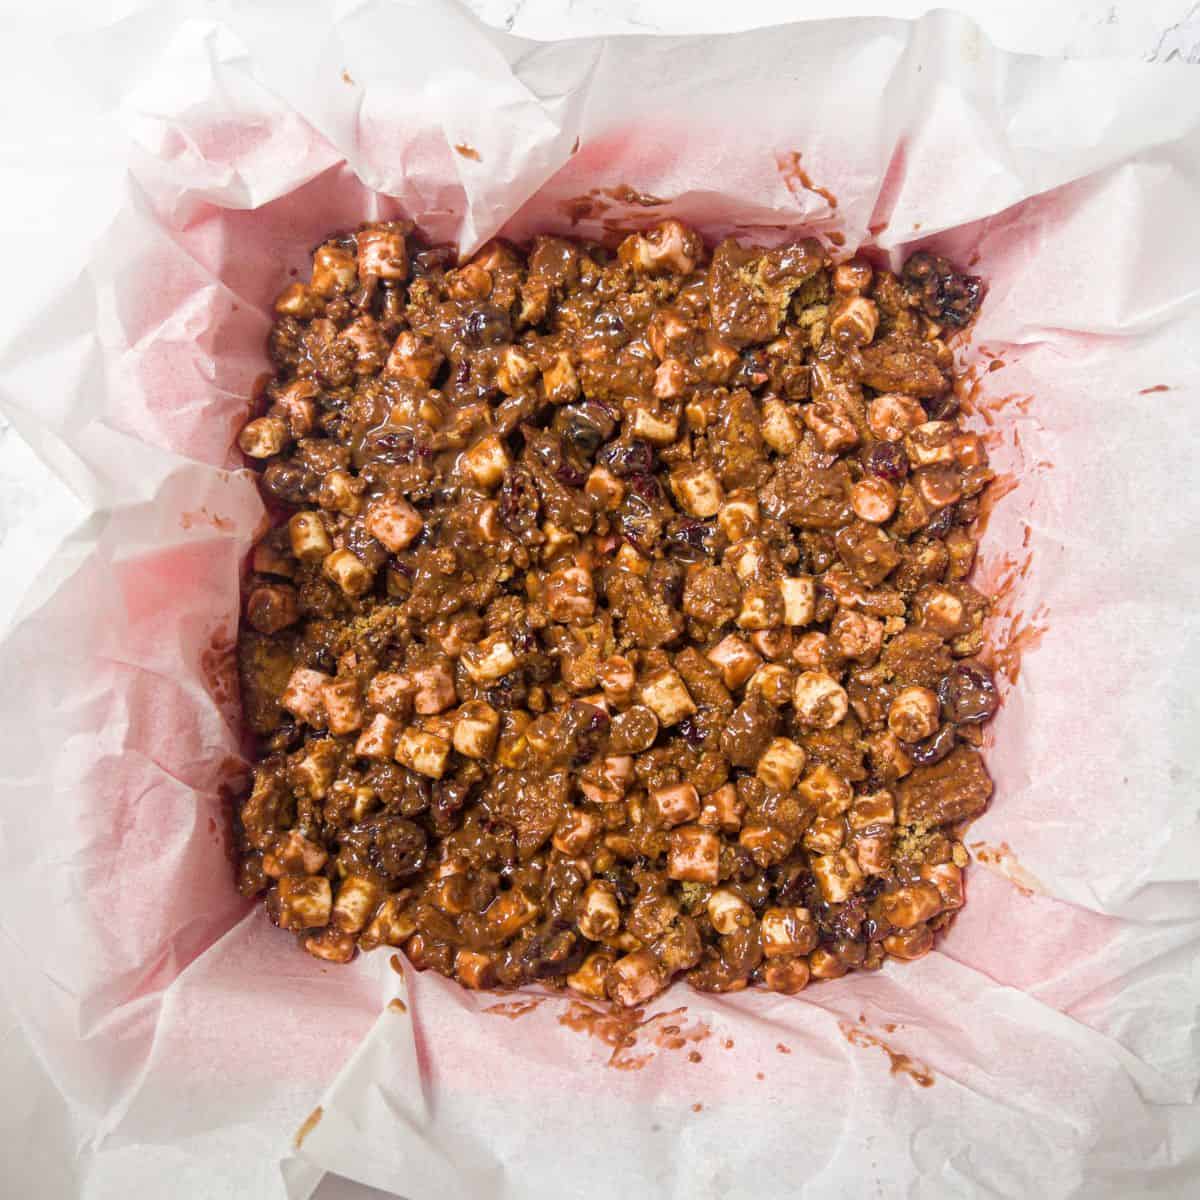 Un-set rocky road mix in a greaseproof paper lined baking tin.